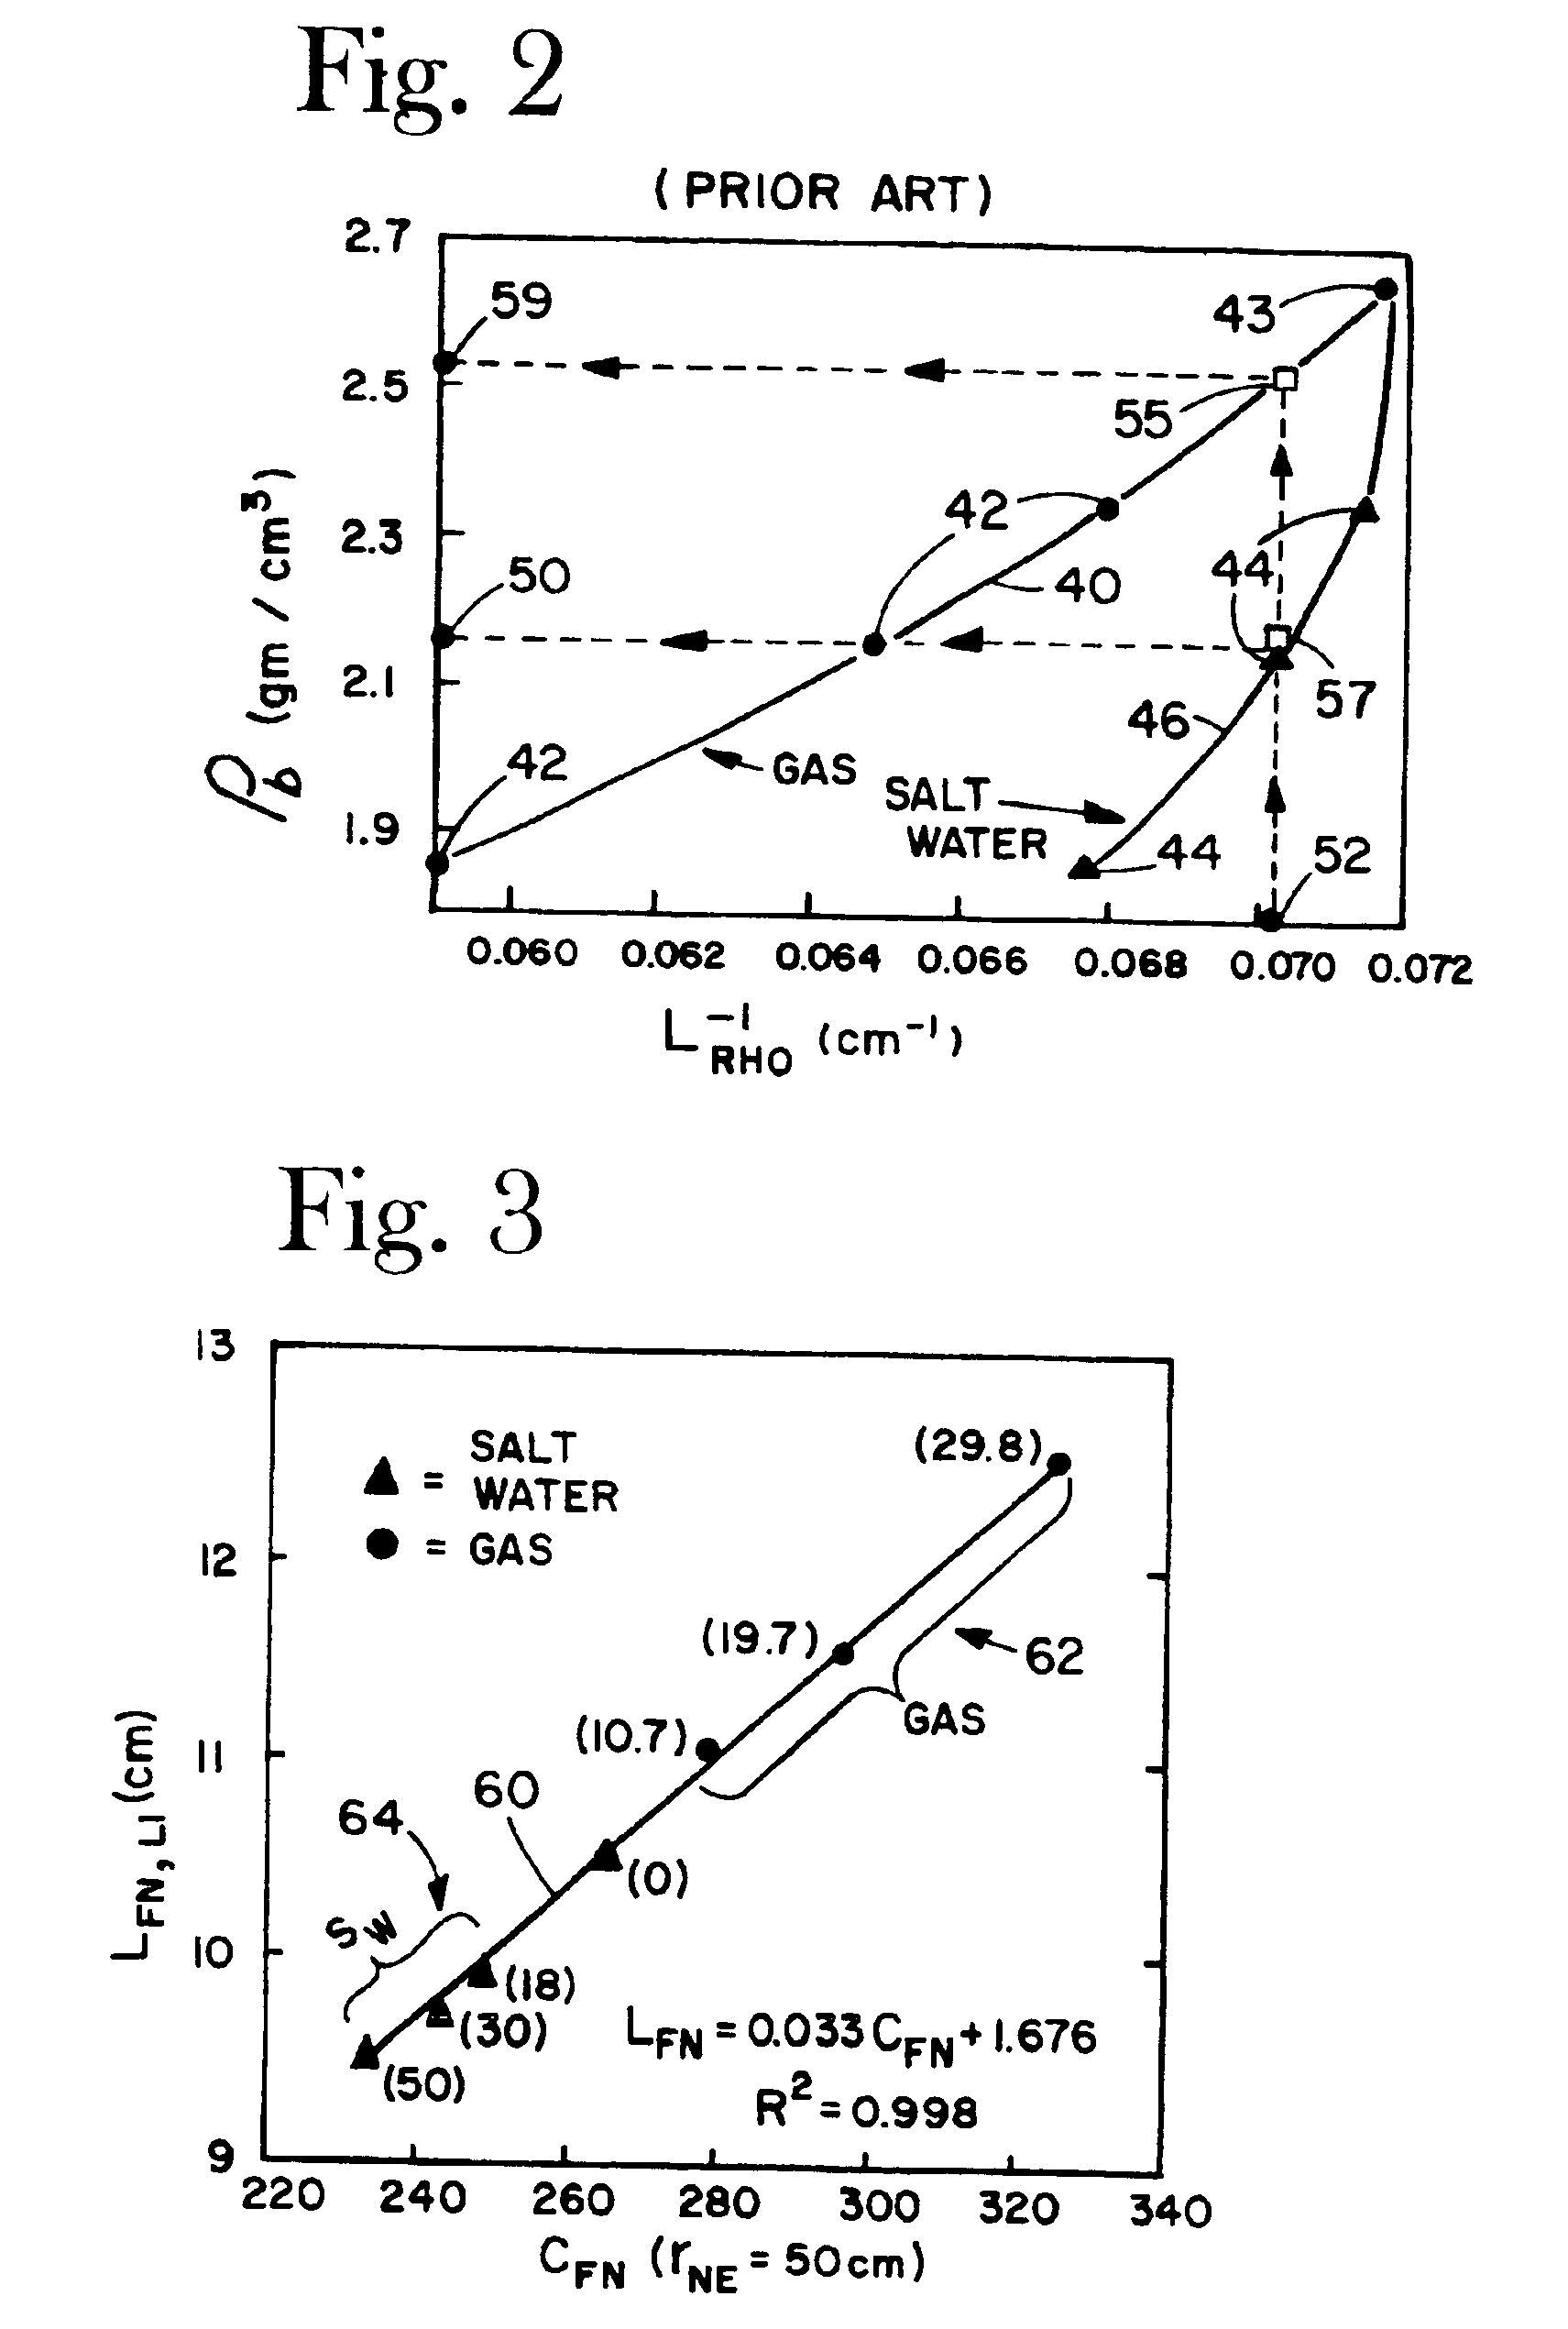 Apparatus and method for determining density, porosity and fluid saturation of formations penetrated by a borehole